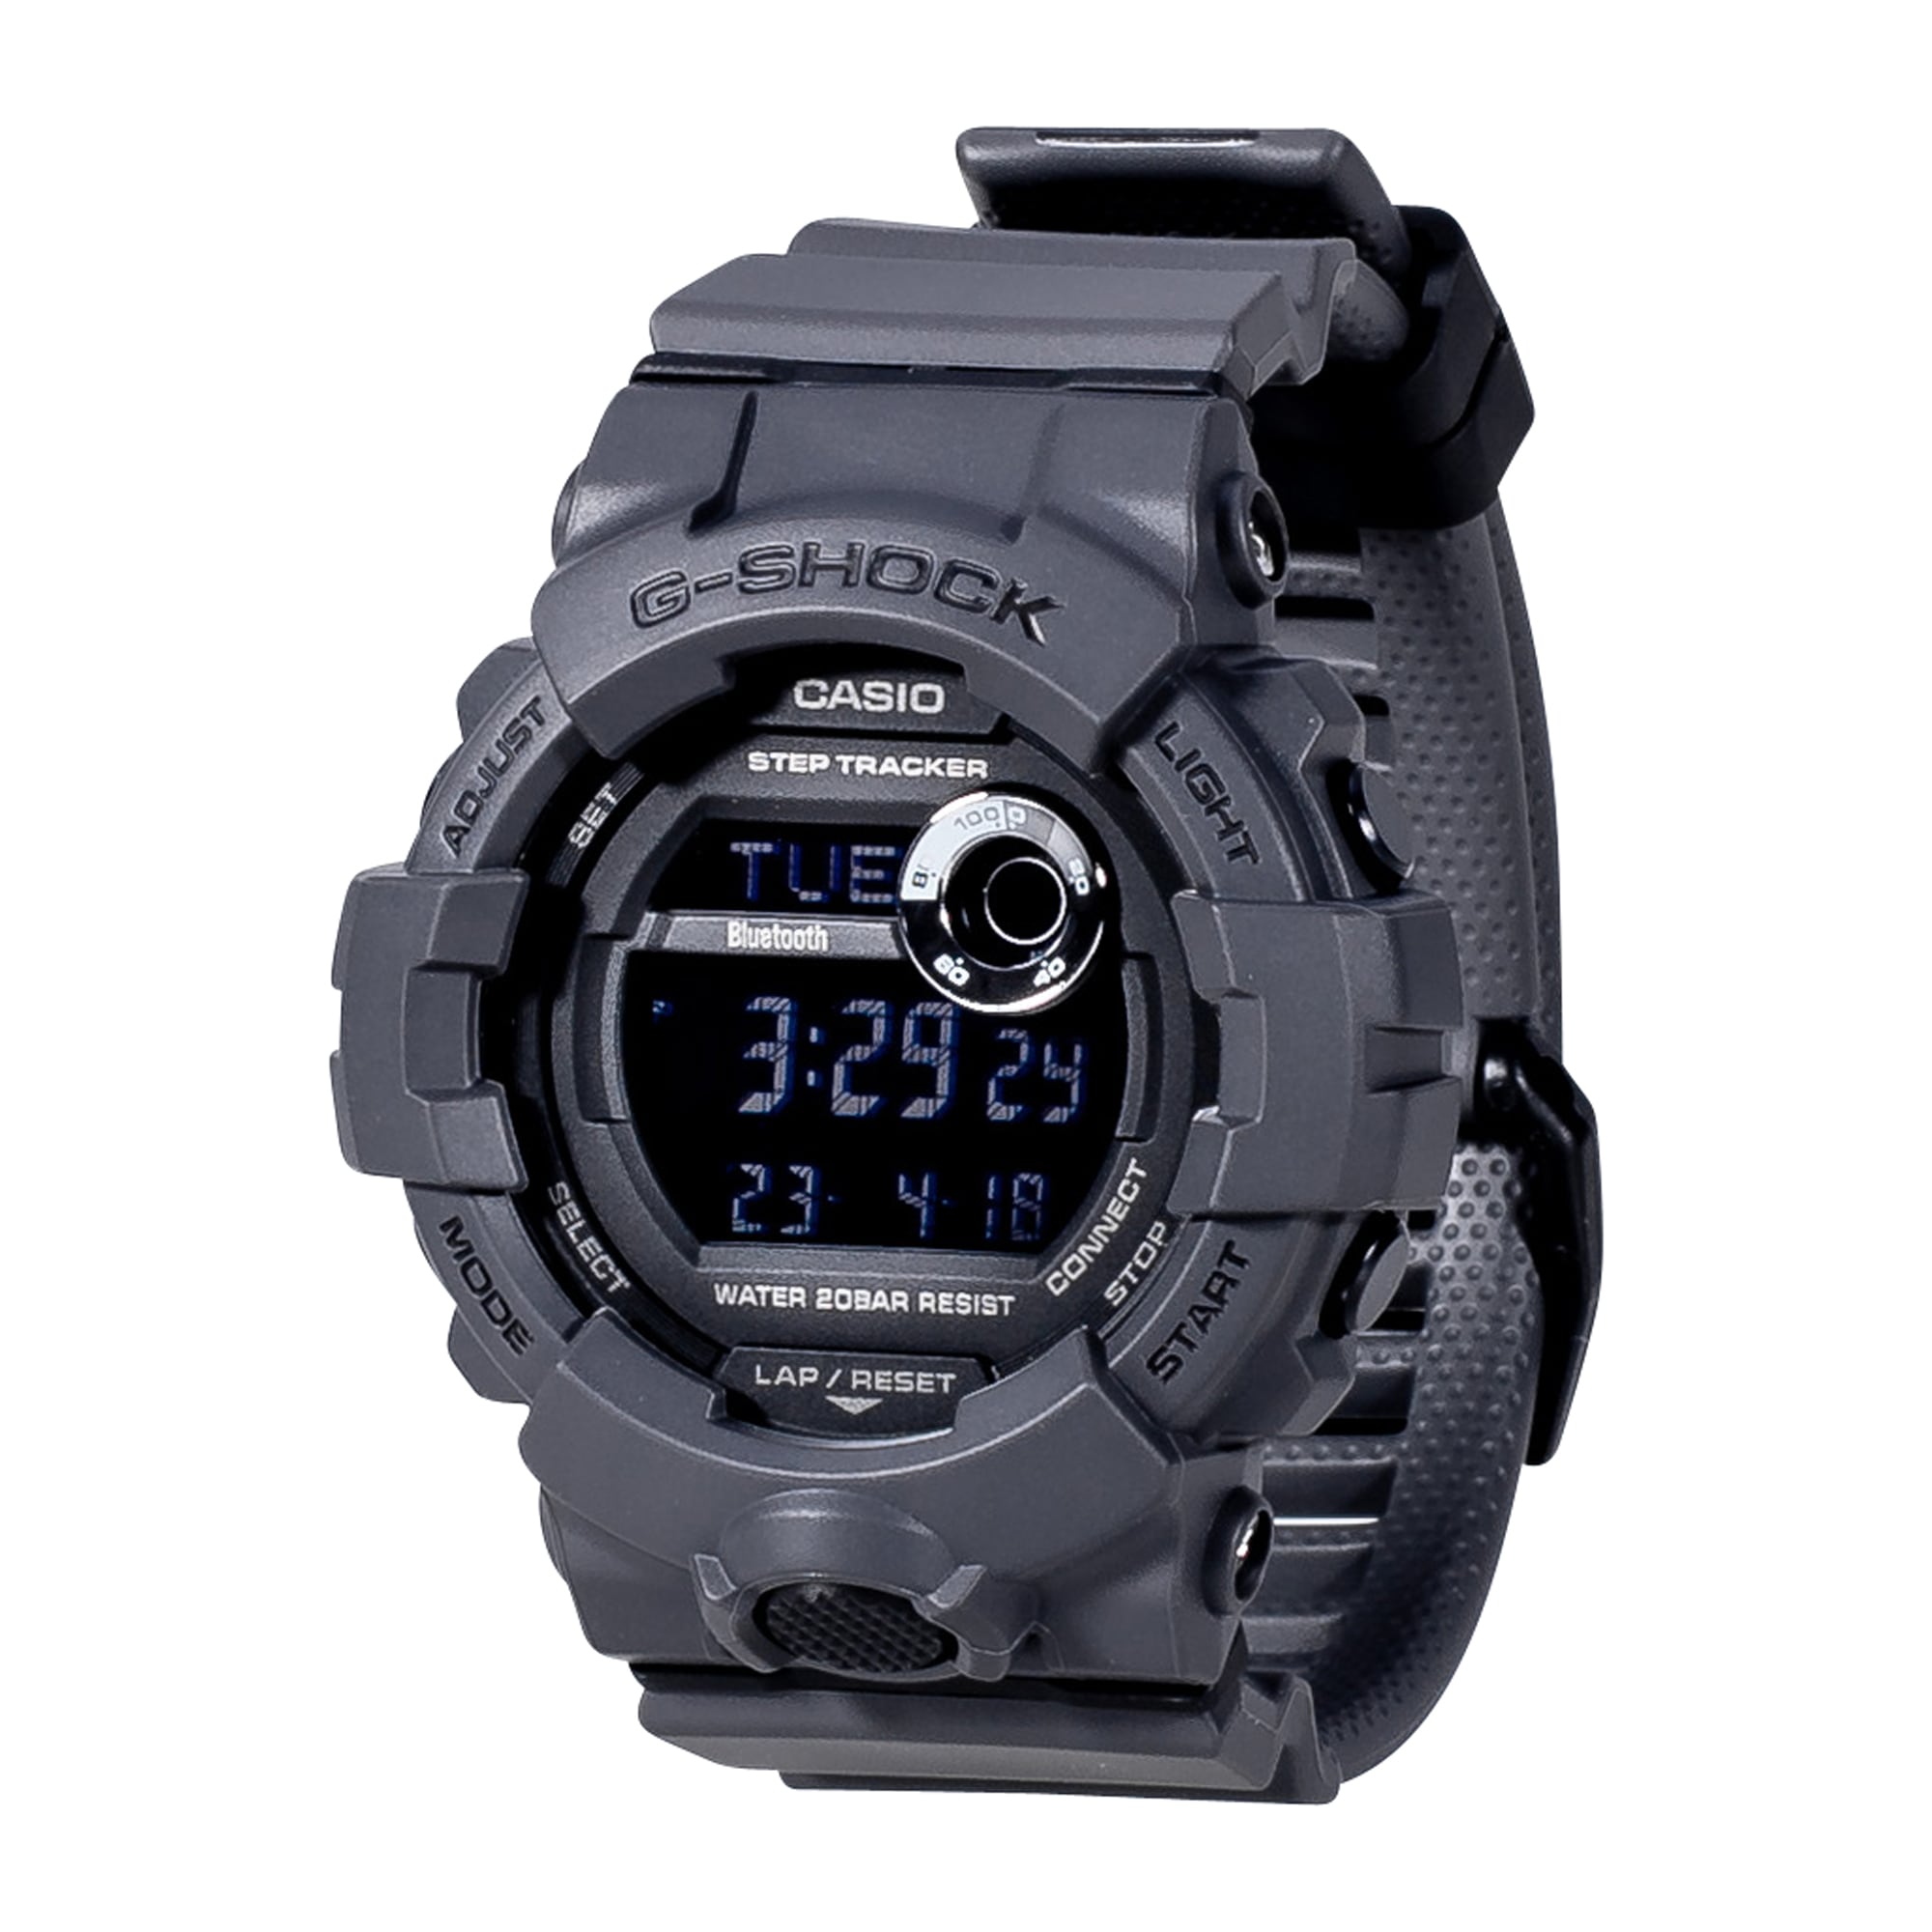 Purchase the Casio G-Squad by Watch GBD-800UC-8ER G-Shock black